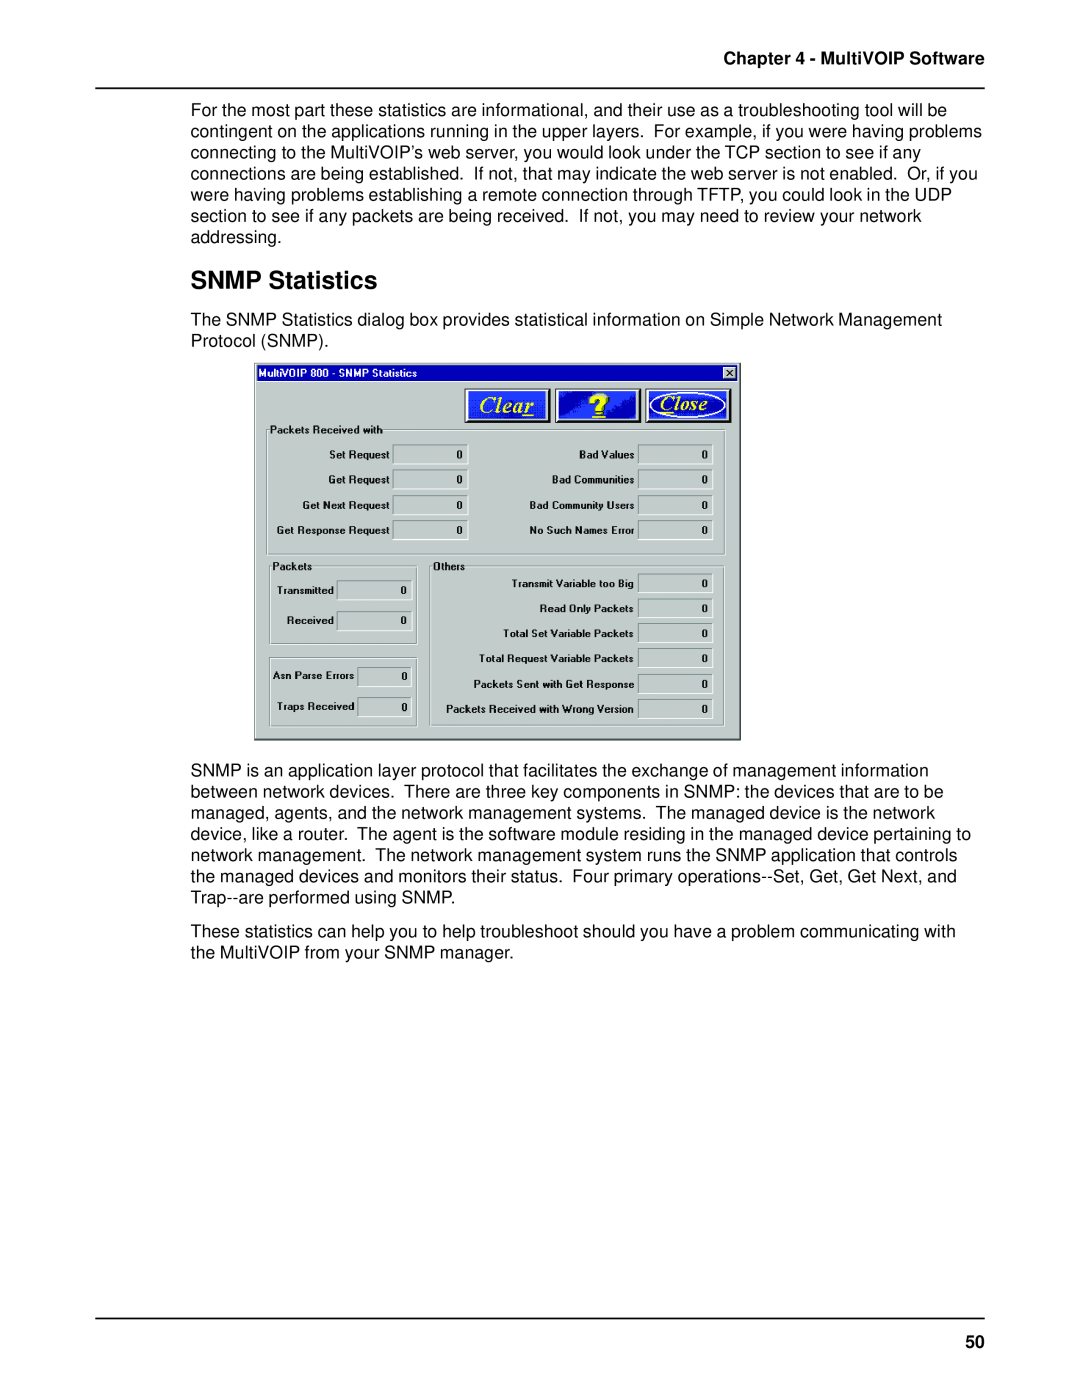 Multi-Tech Systems MVP 800 manual SNMP Statistics, MultiVOIP Software 